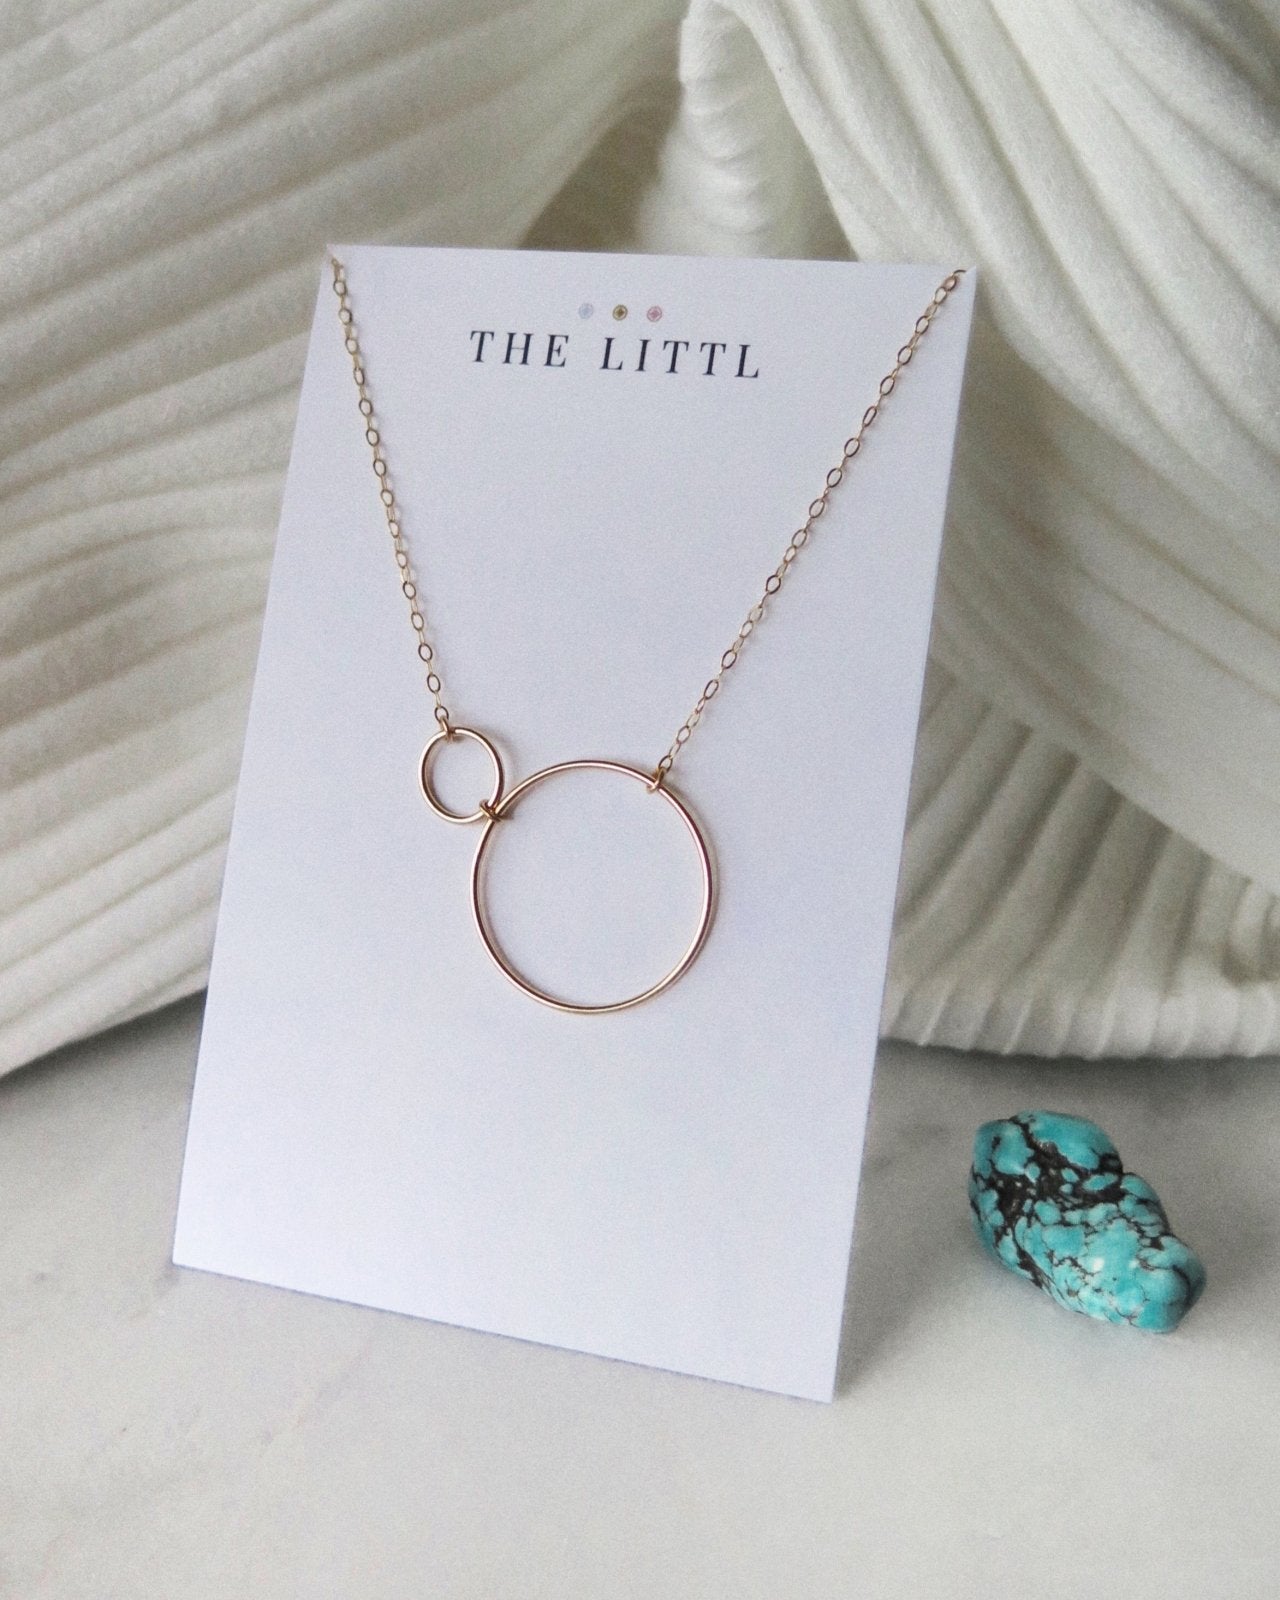 DOUBLE CIRCLE NECKLACE- 14k Yellow Gold - The Littl - Classic Chain - 37cm (choker)